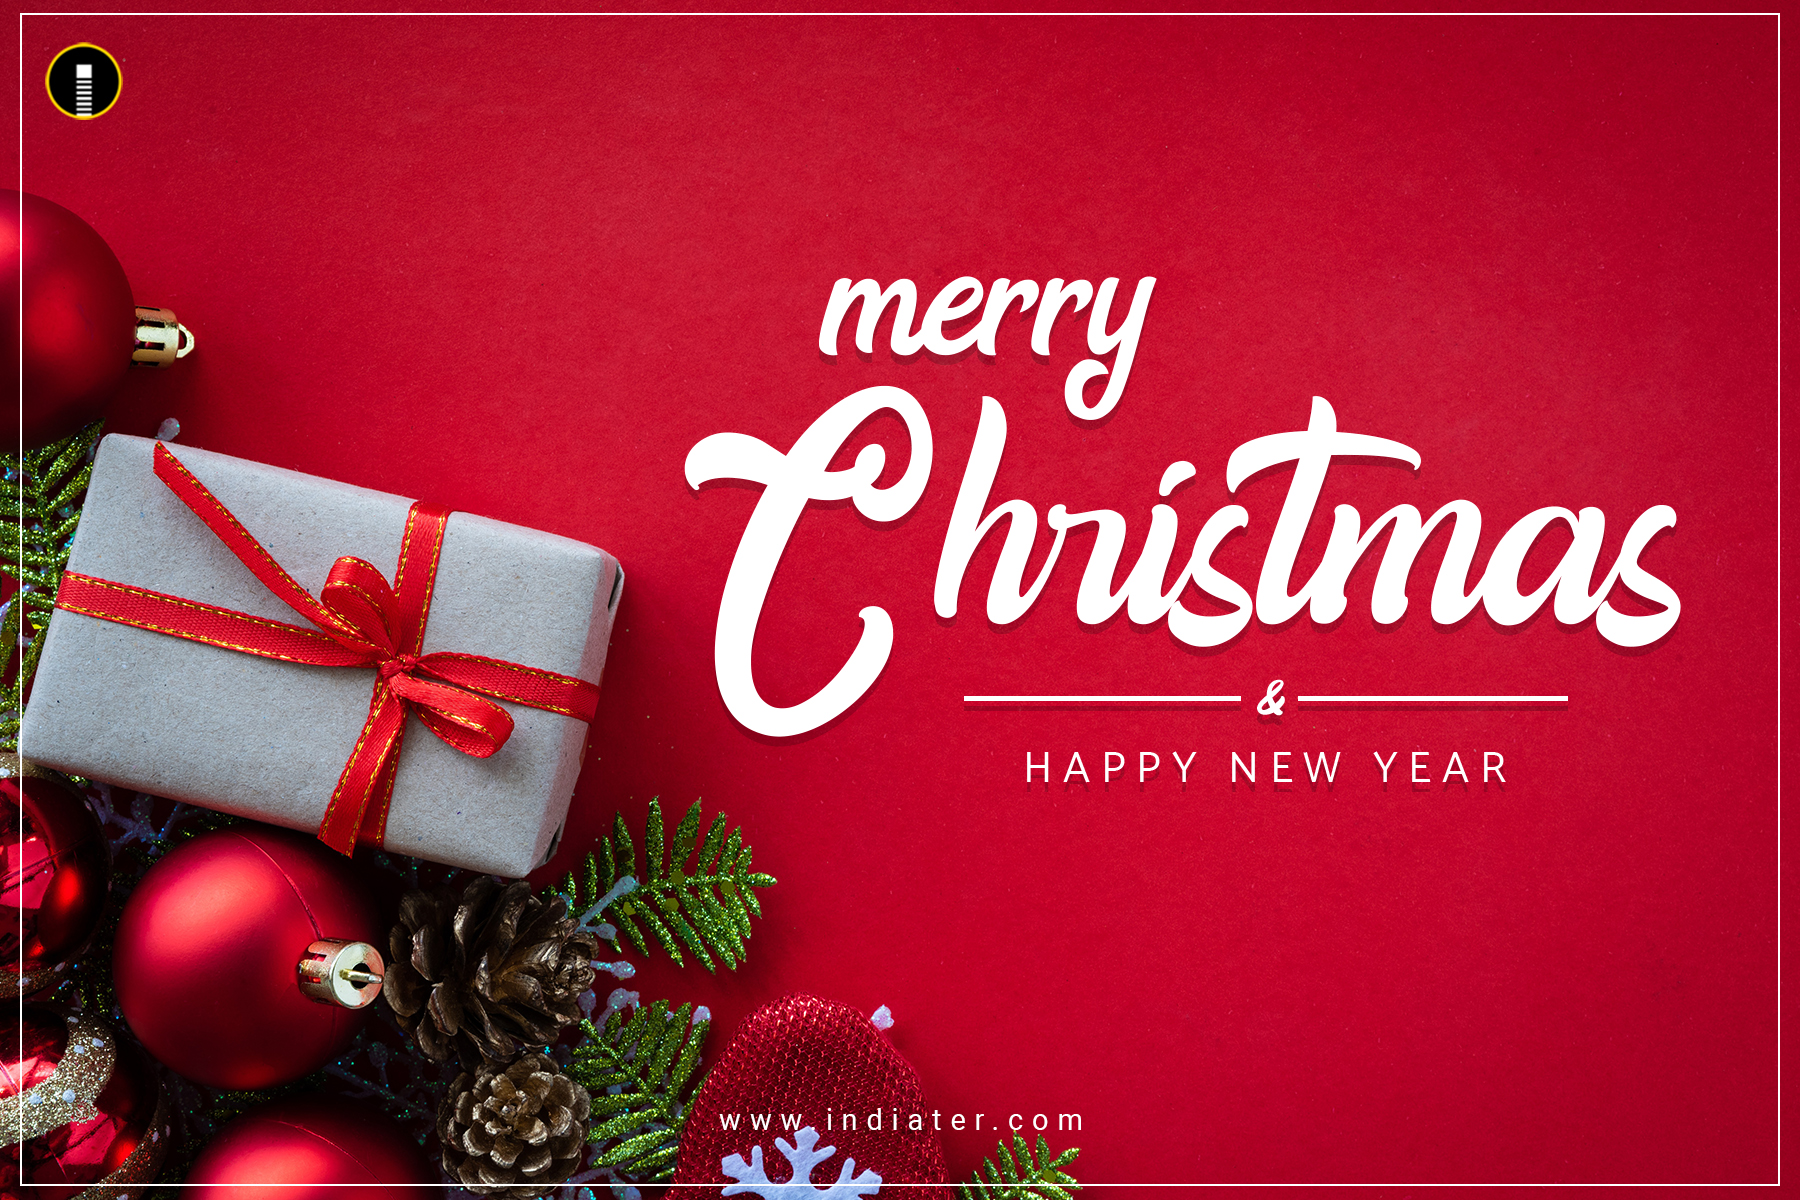 merry christmas and happy new year greetings